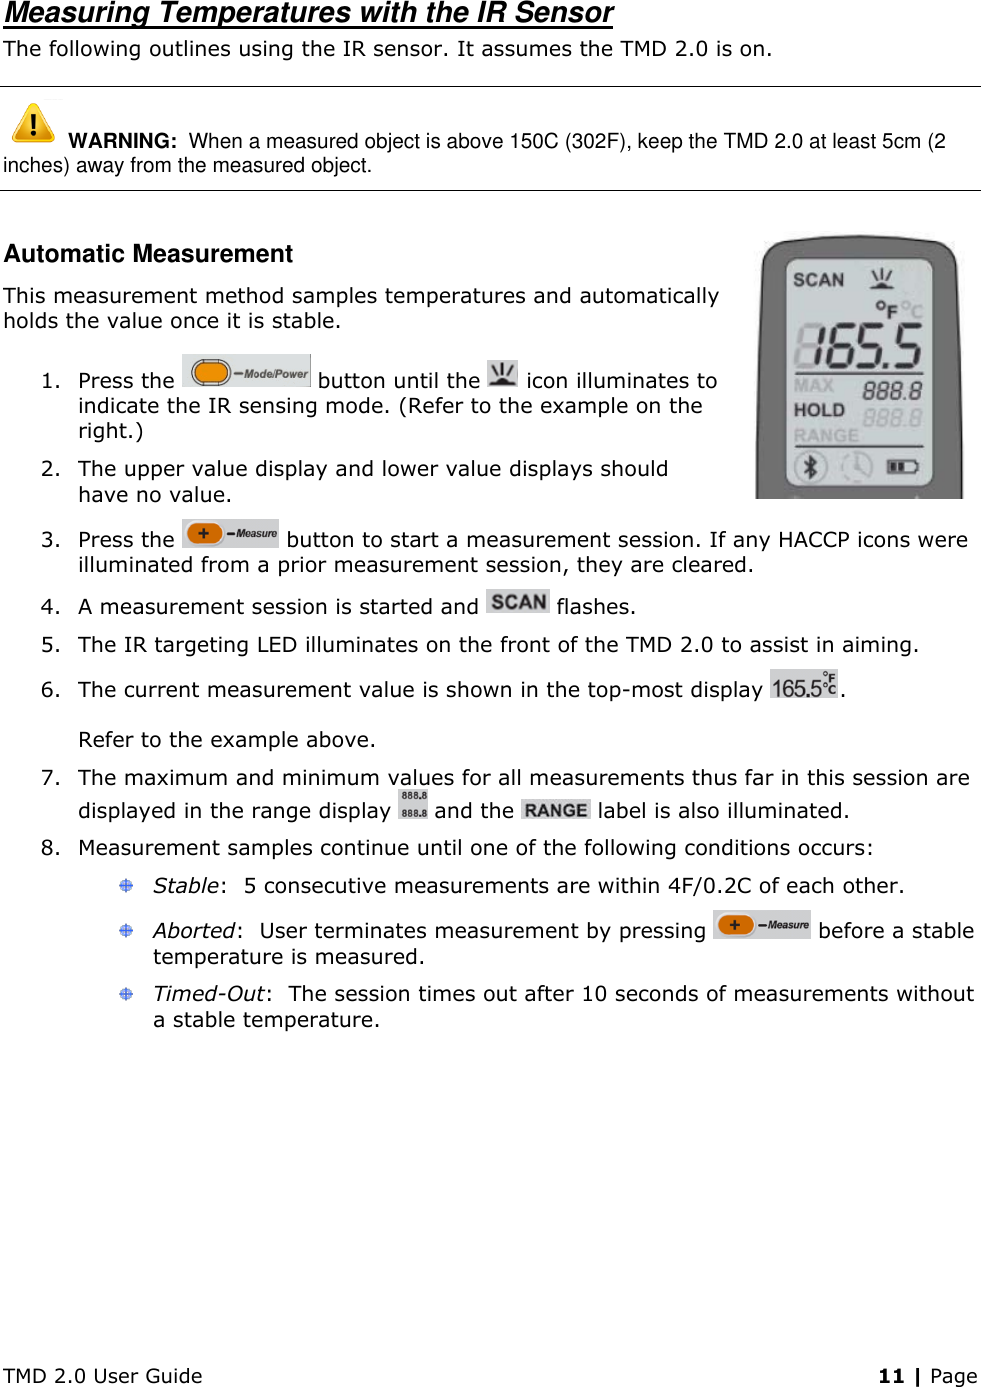 TMD 2.0 User Guide    11 | Page Measuring Temperatures with the IR Sensor The following outlines using the IR sensor. It assumes the TMD 2.0 is on.  WARNING:  When a measured object is above 150C (302F), keep the TMD 2.0 at least 5cm (2 inches) away from the measured object. Automatic Measurement This measurement method samples temperatures and automatically holds the value once it is stable. 1. Press the   button until the   icon illuminates to indicate the IR sensing mode. (Refer to the example on the right.) 2. The upper value display and lower value displays should have no value. 3. Press the   button to start a measurement session. If any HACCP icons were illuminated from a prior measurement session, they are cleared. 4. A measurement session is started and   flashes. 5. The IR targeting LED illuminates on the front of the TMD 2.0 to assist in aiming. 6. The current measurement value is shown in the top-most display  .   Refer to the example above. 7. The maximum and minimum values for all measurements thus far in this session are displayed in the range display   and the   label is also illuminated. 8. Measurement samples continue until one of the following conditions occurs:  Stable:  5 consecutive measurements are within 4F/0.2C of each other.  Aborted:  User terminates measurement by pressing   before a stable temperature is measured.  Timed-Out:  The session times out after 10 seconds of measurements without a stable temperature. 